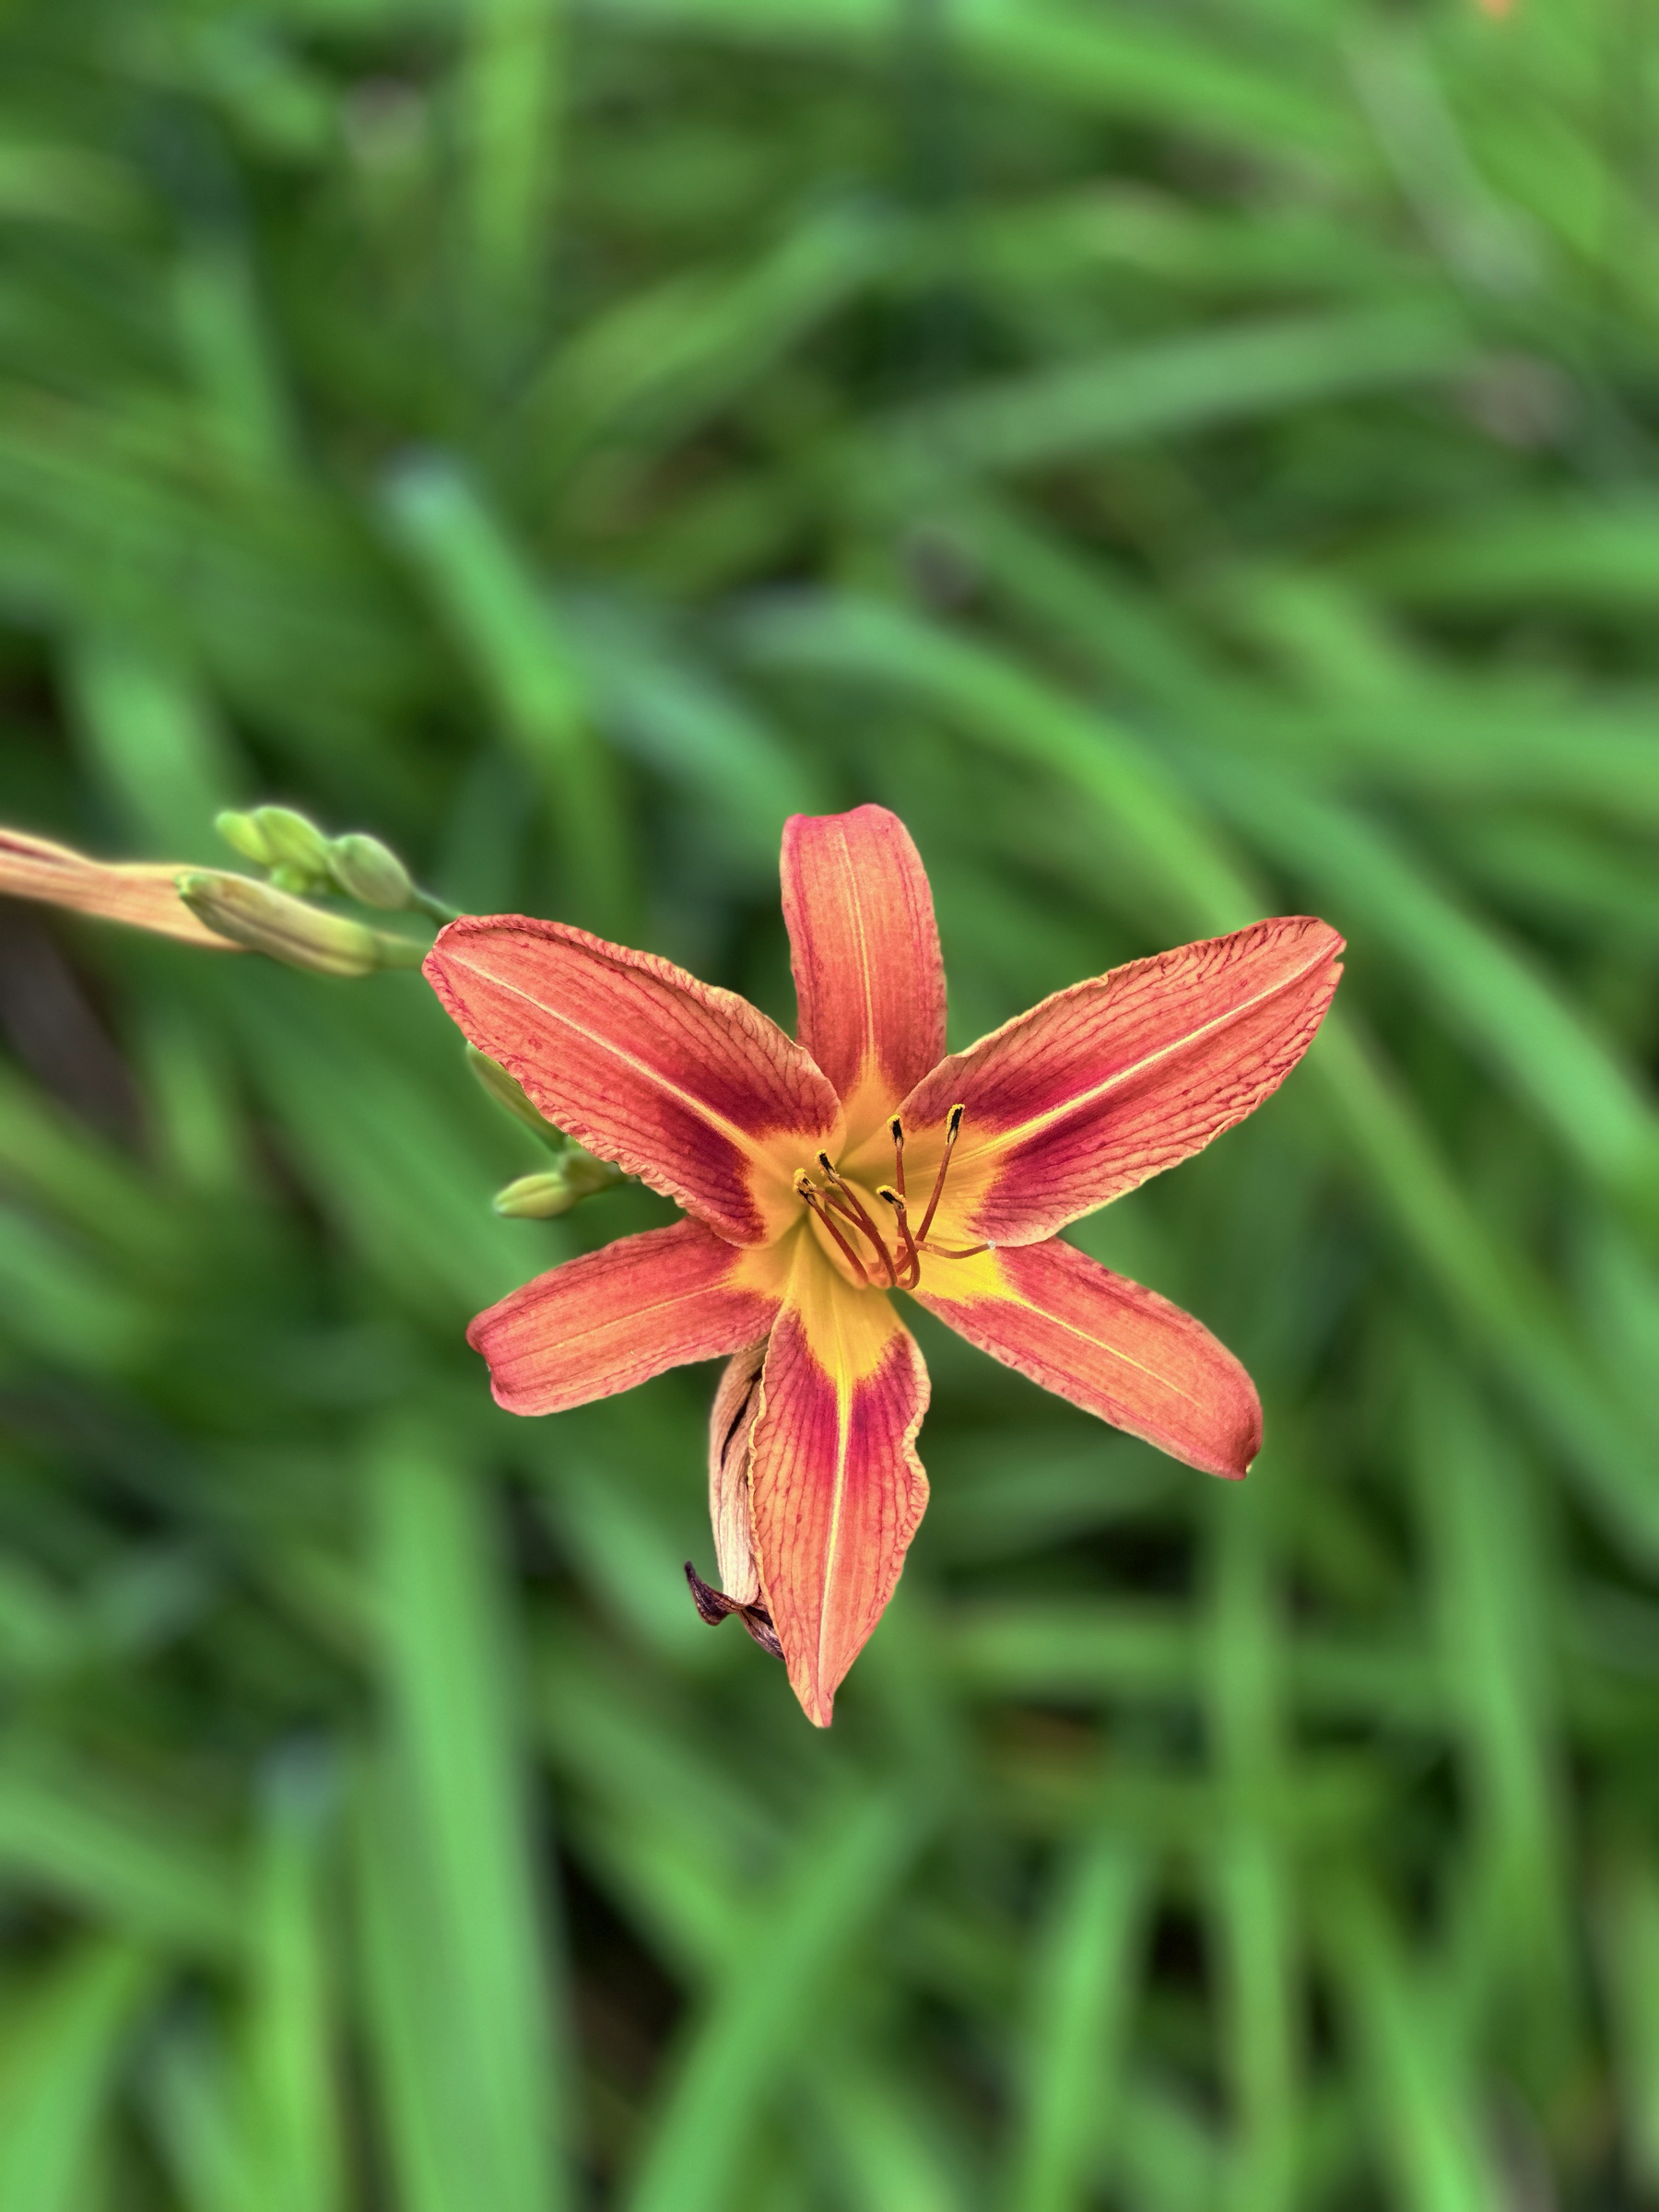 Orange and red lily 